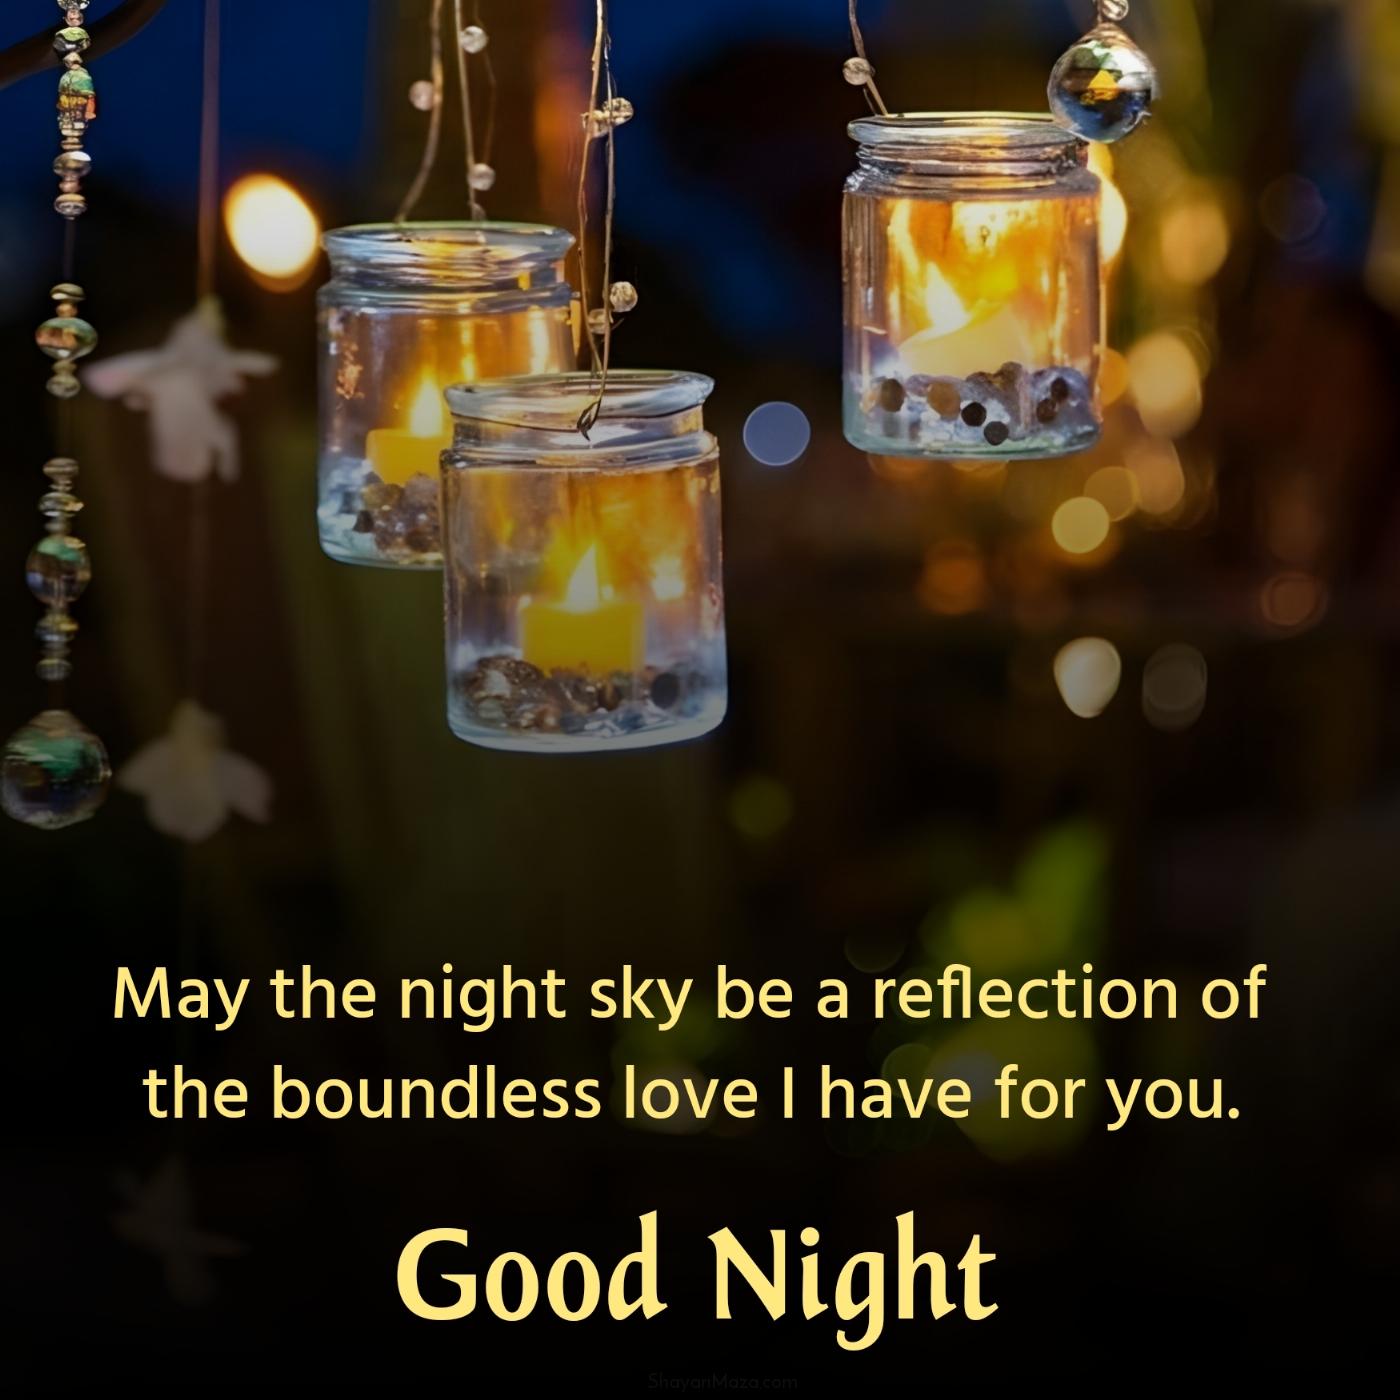 May the night sky be a reflection of the boundless love